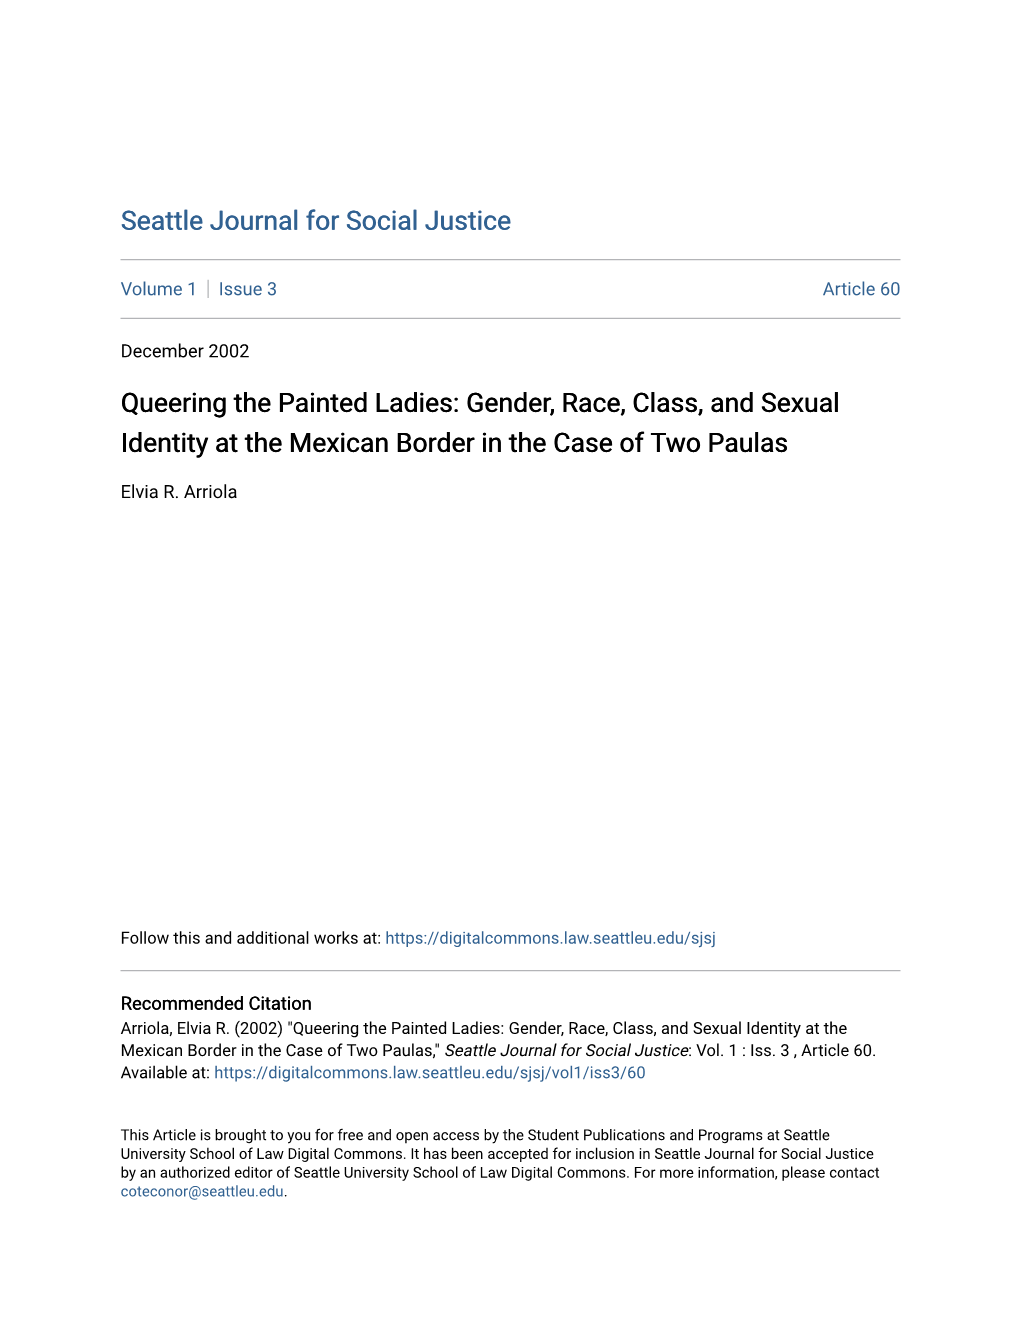 Gender, Race, Class, and Sexual Identity at the Mexican Border in the Case of Two Paulas